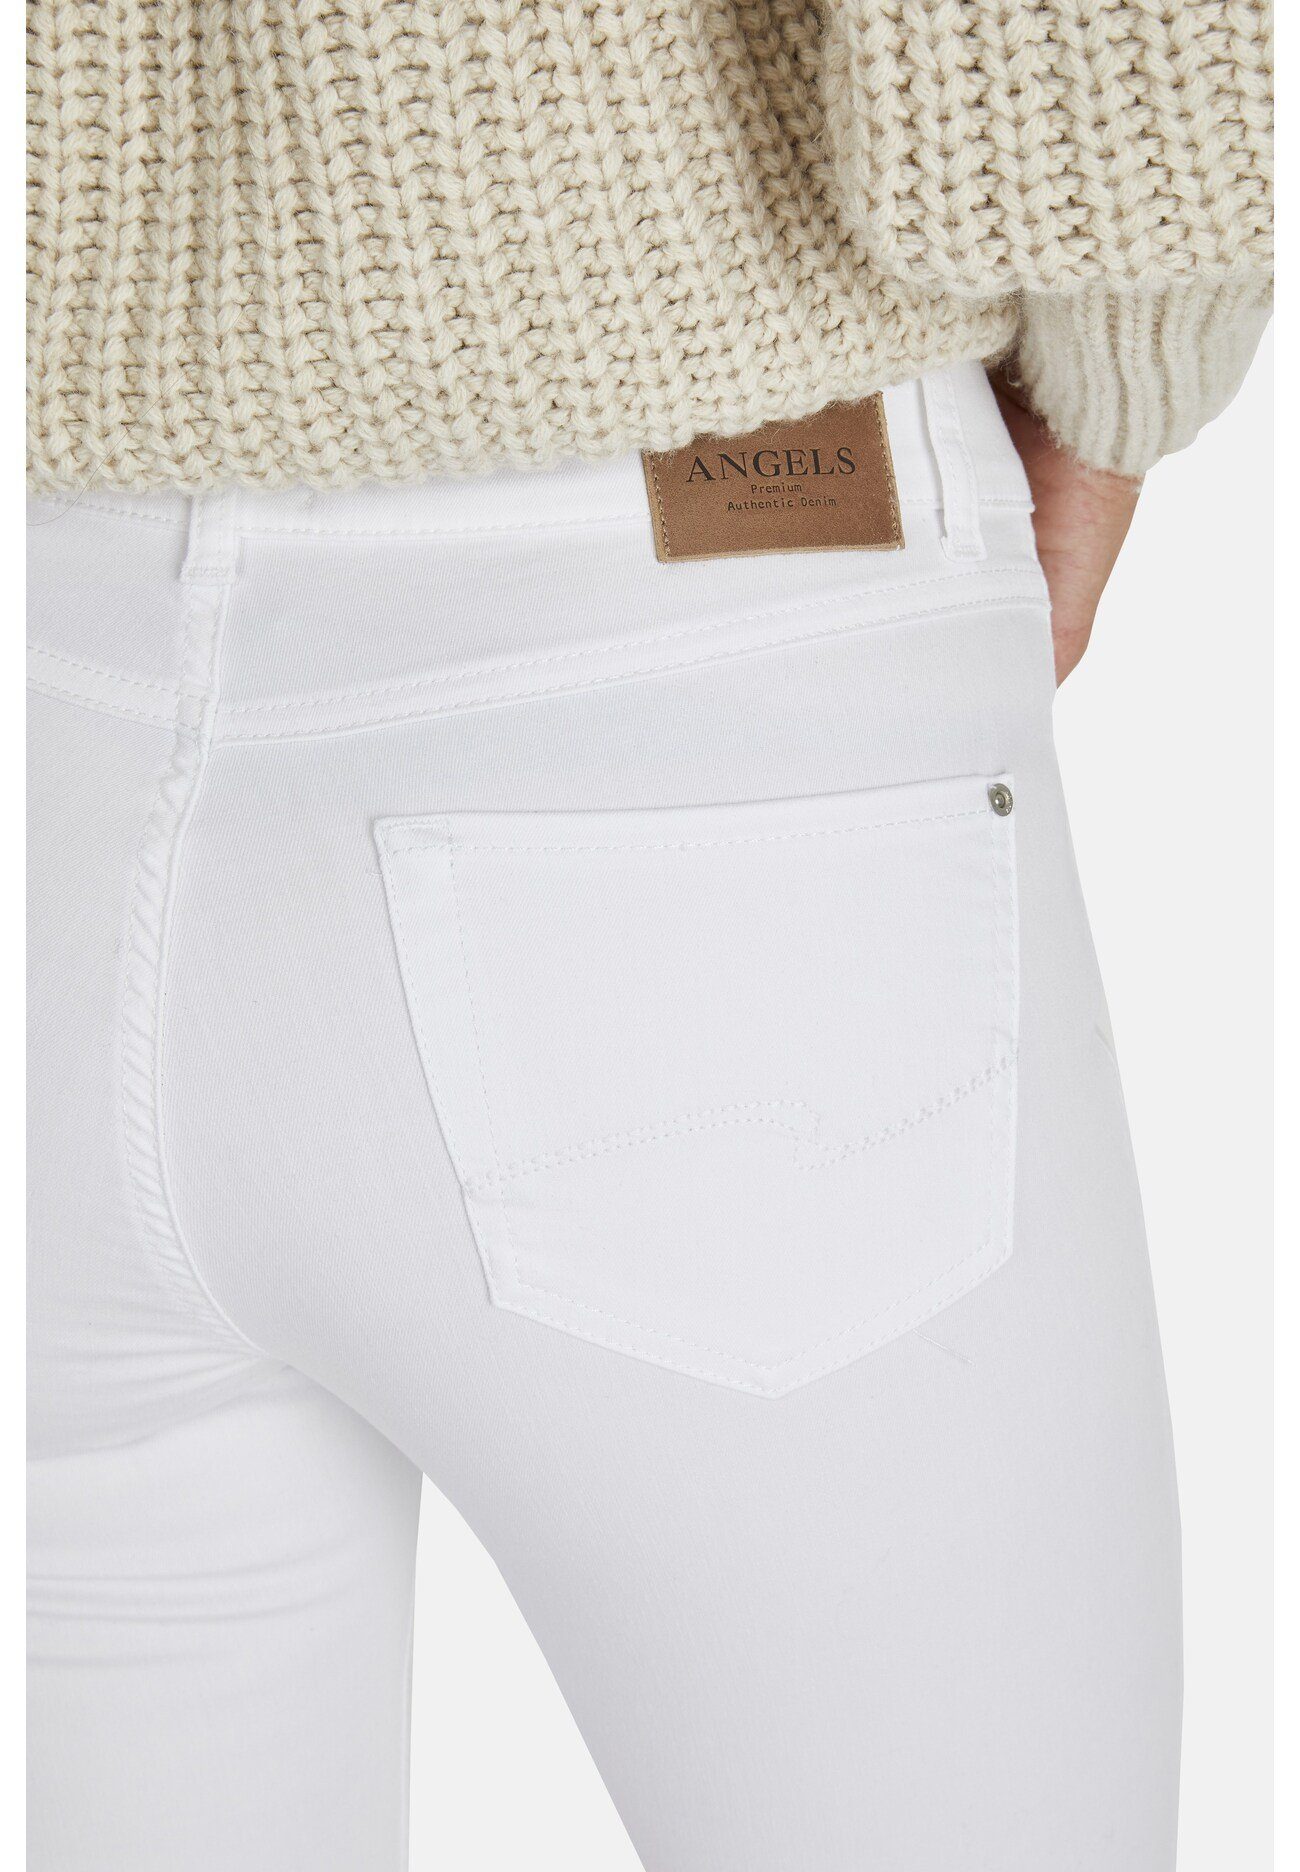 332 STRETCH ANGELS ANGELS - 3400.70 white CICI JEANS Stretch-Jeans